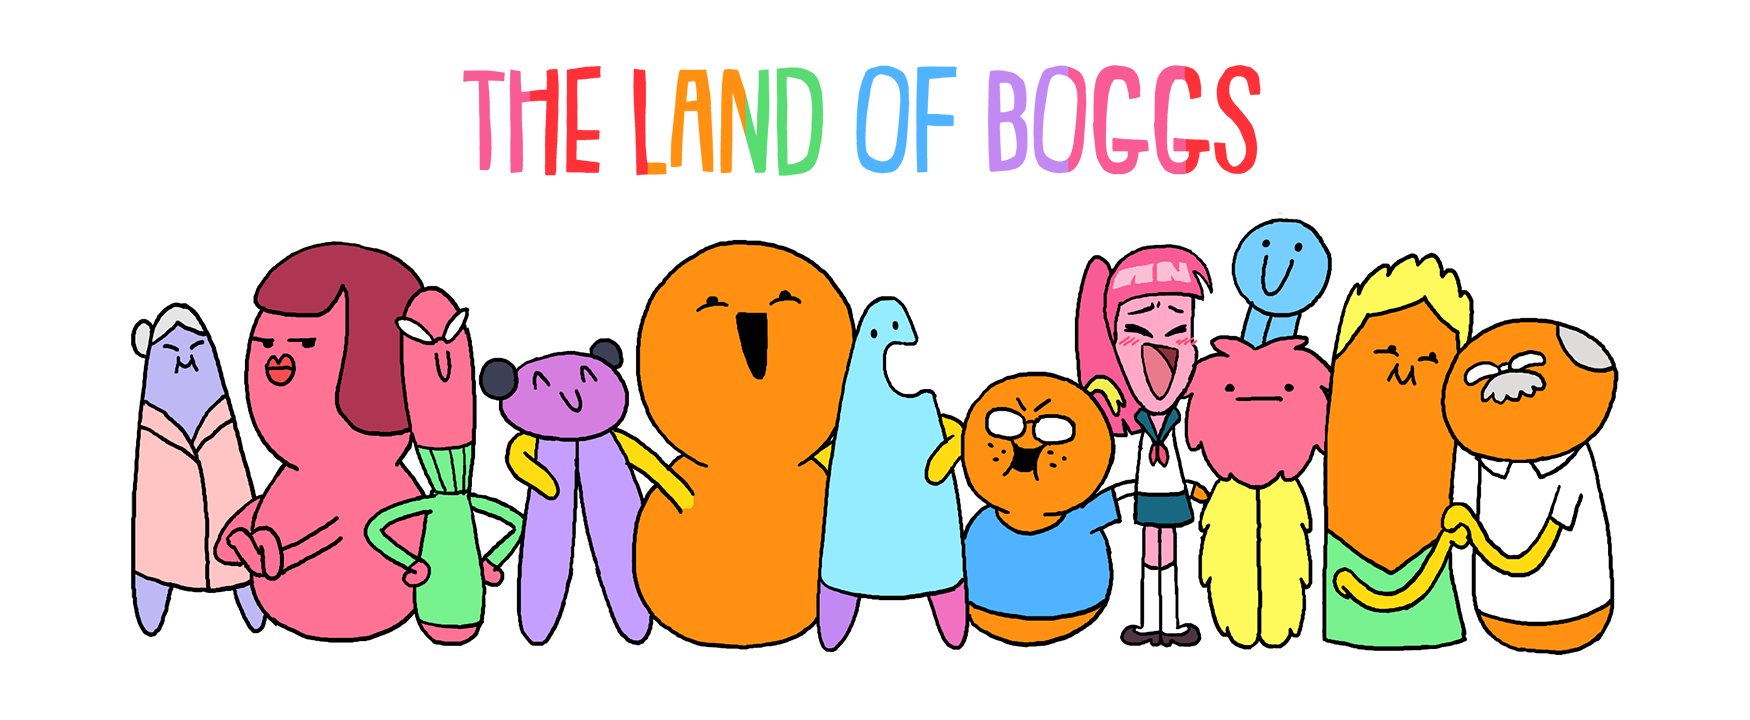 The Land Of Boggs